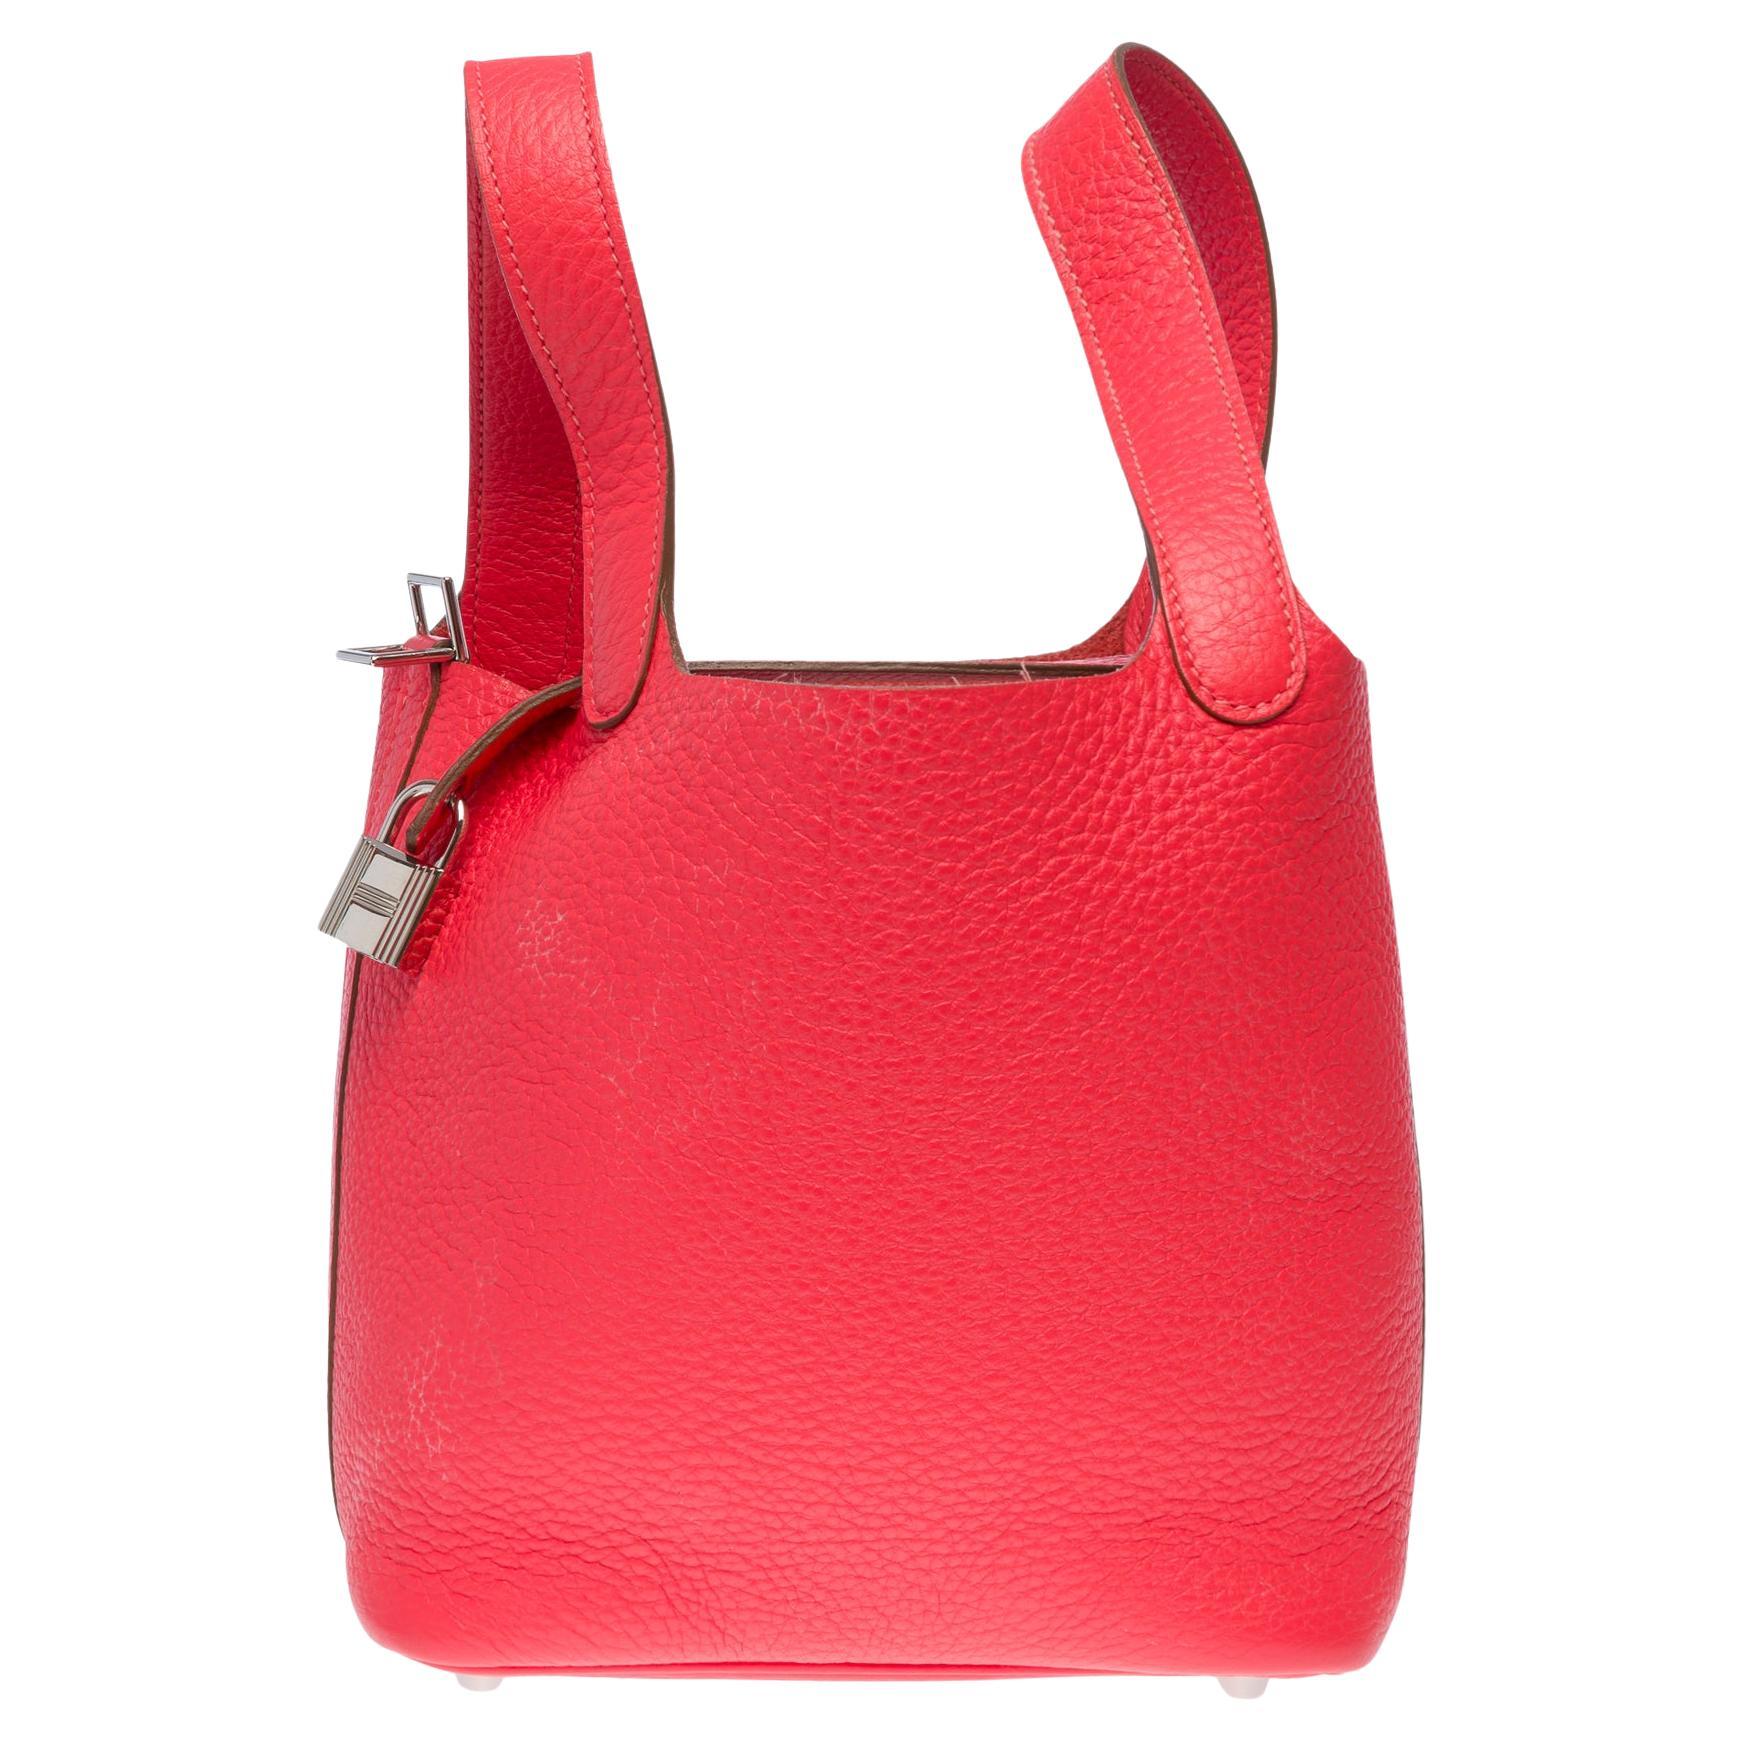 Gorgeous Hermès Picotin 18 Lock in Jaïpur Pink Taurillon Clémence leather , SHW For Sale